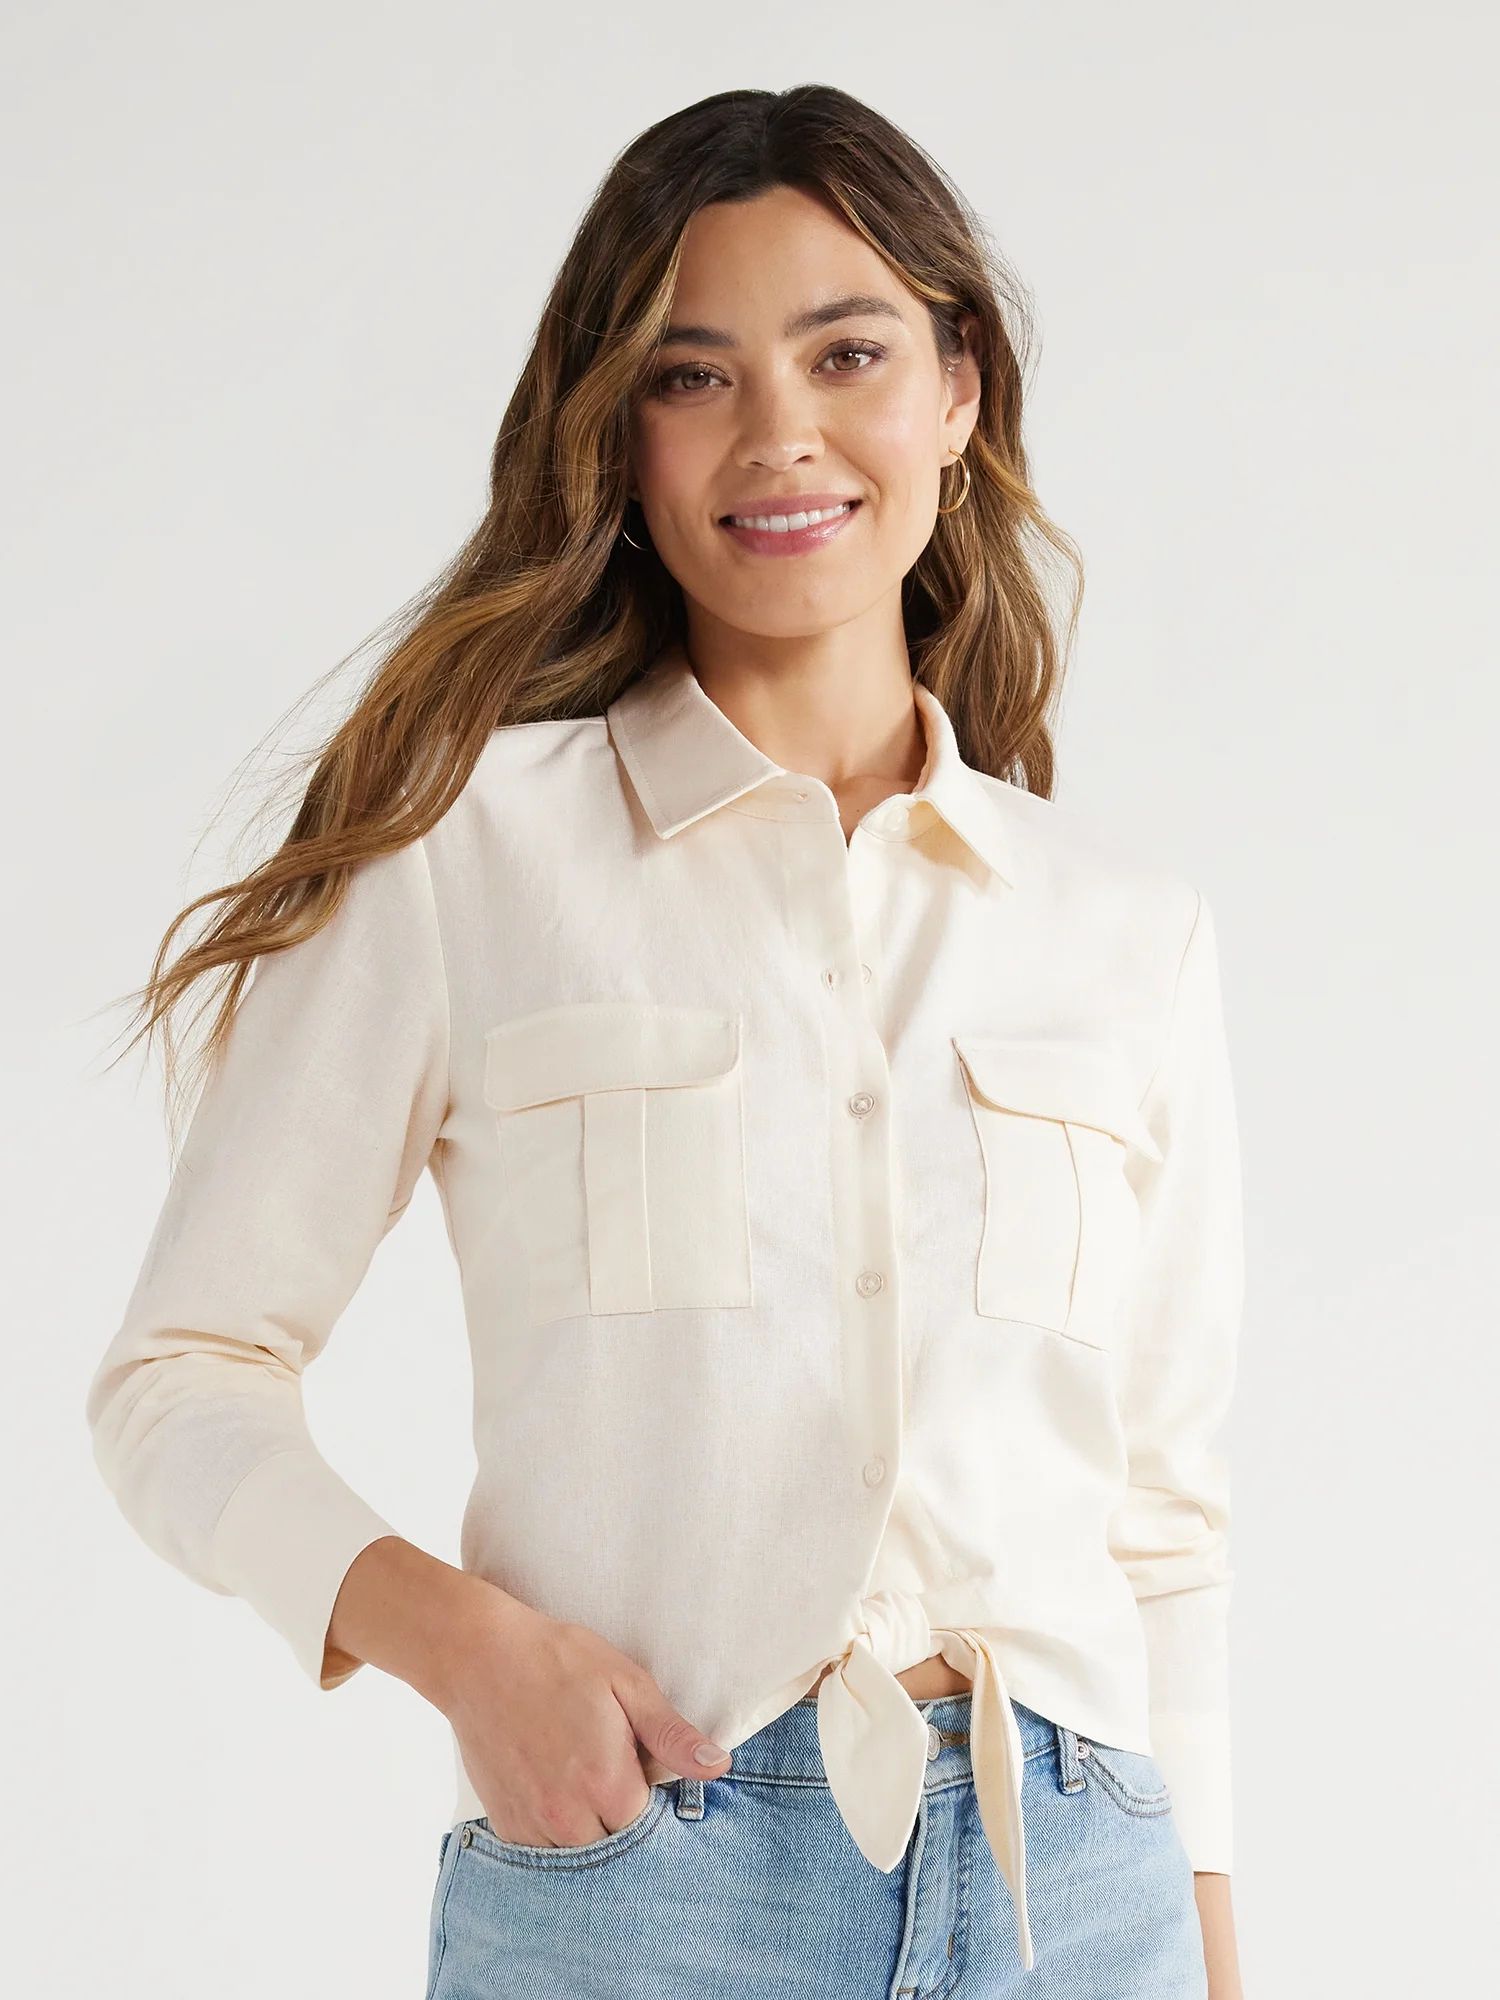 Sofia Jeans Women's and Women's Plus Linen Blend Tie Front Top with Cargo Pockets, Sizes XS-5X | Walmart (US)